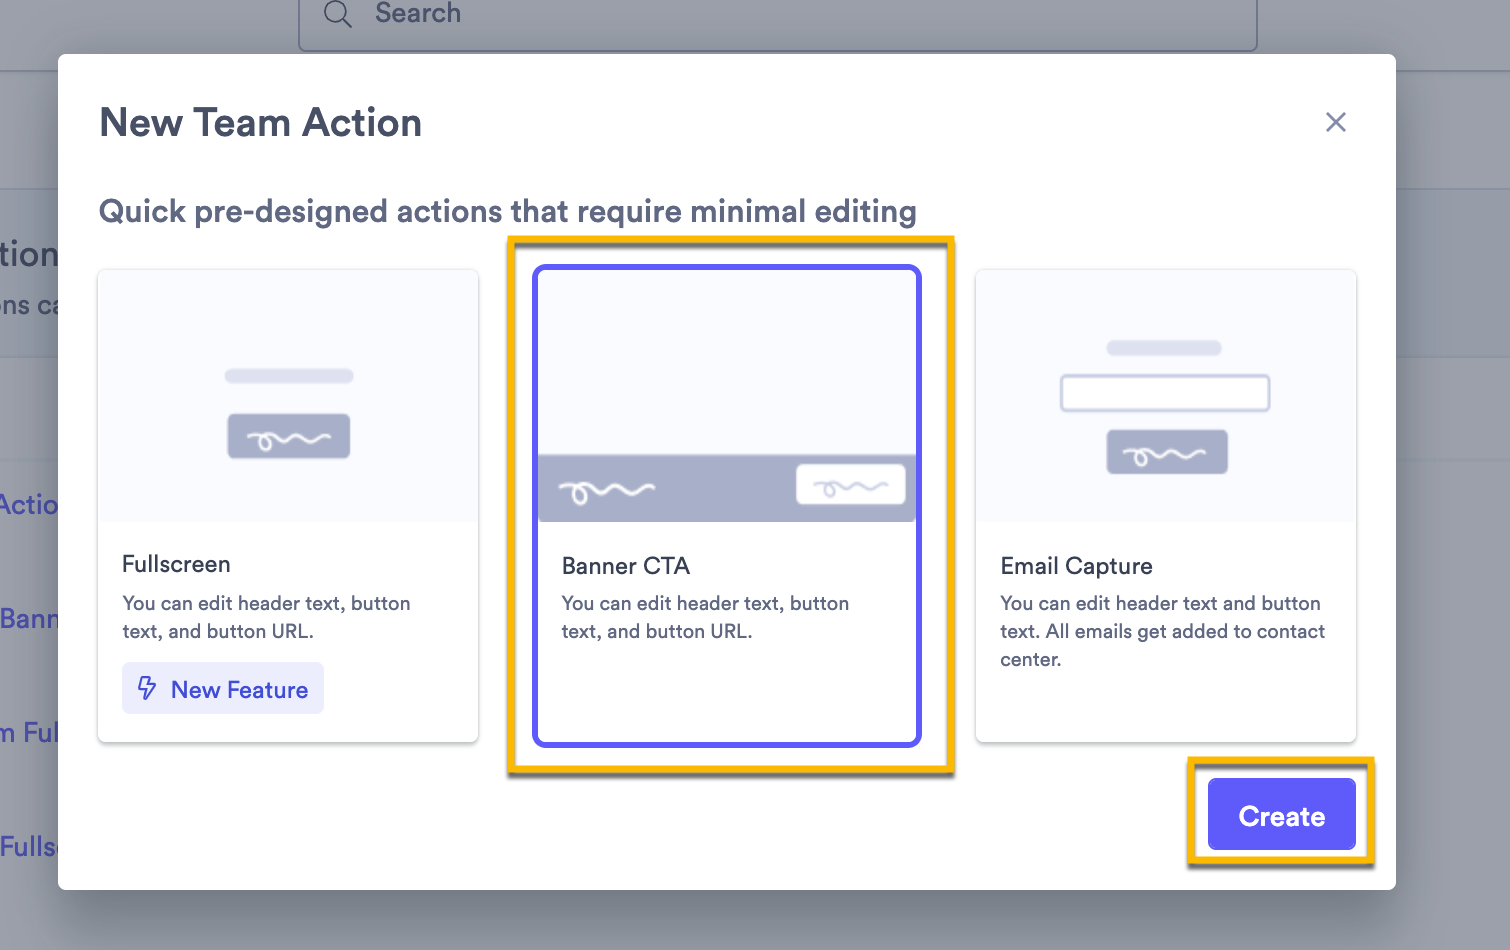 Action type selection screen showing all available actions to choose from